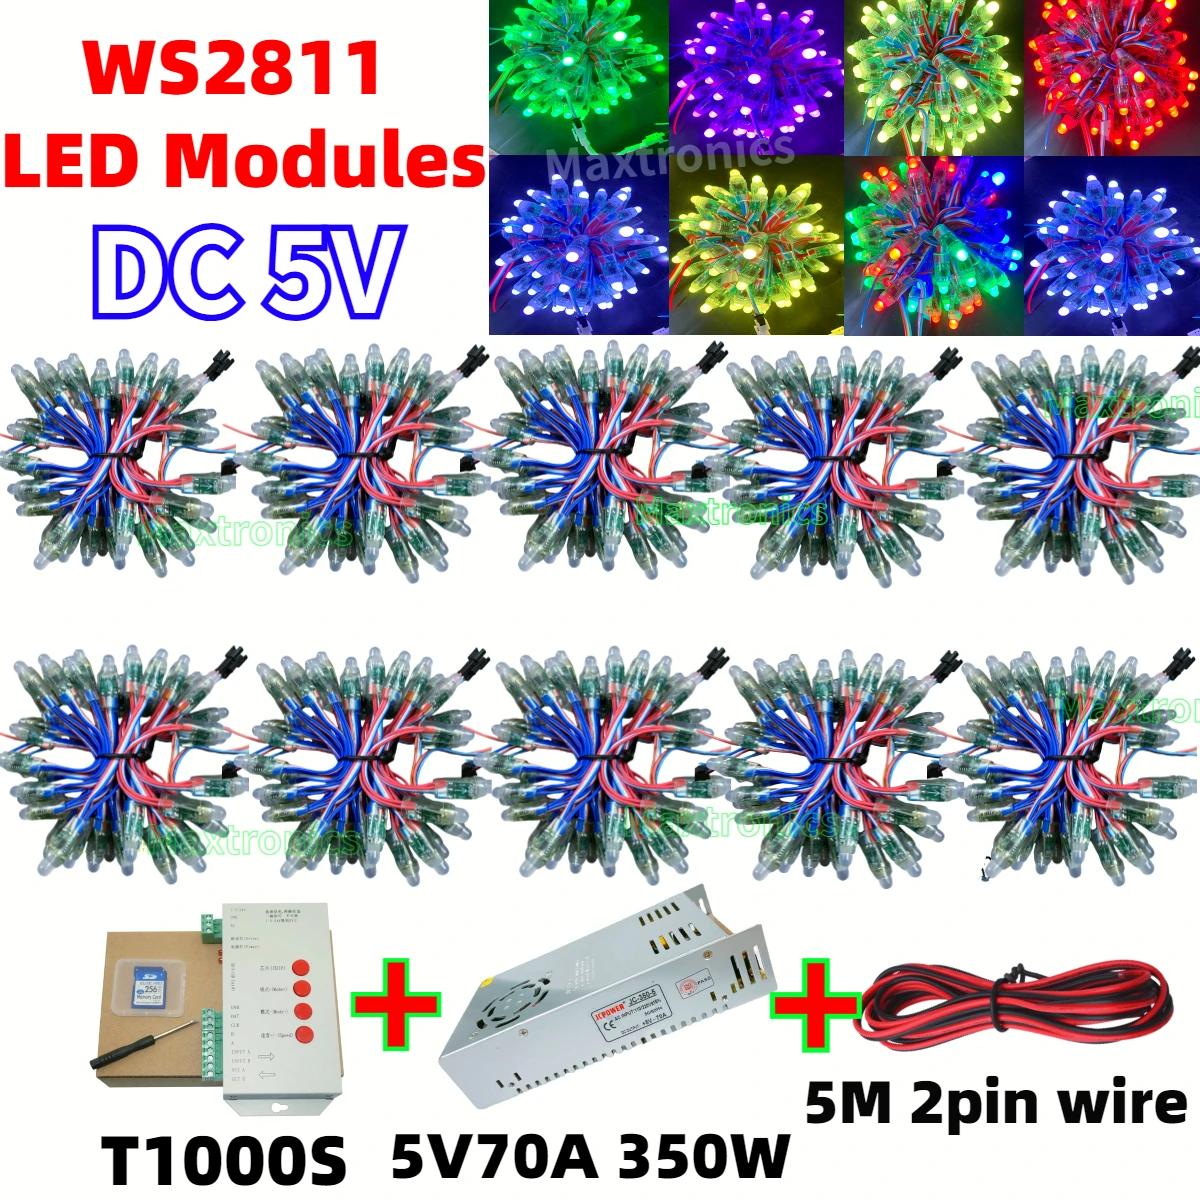 Ͼ Ÿ Ǯ ÷ LED , ּ    Ƽ Ʈ , IP68 Ǵ T1000s 5V70A ŰƮ, DC5V WS2811, 12mm, 500 